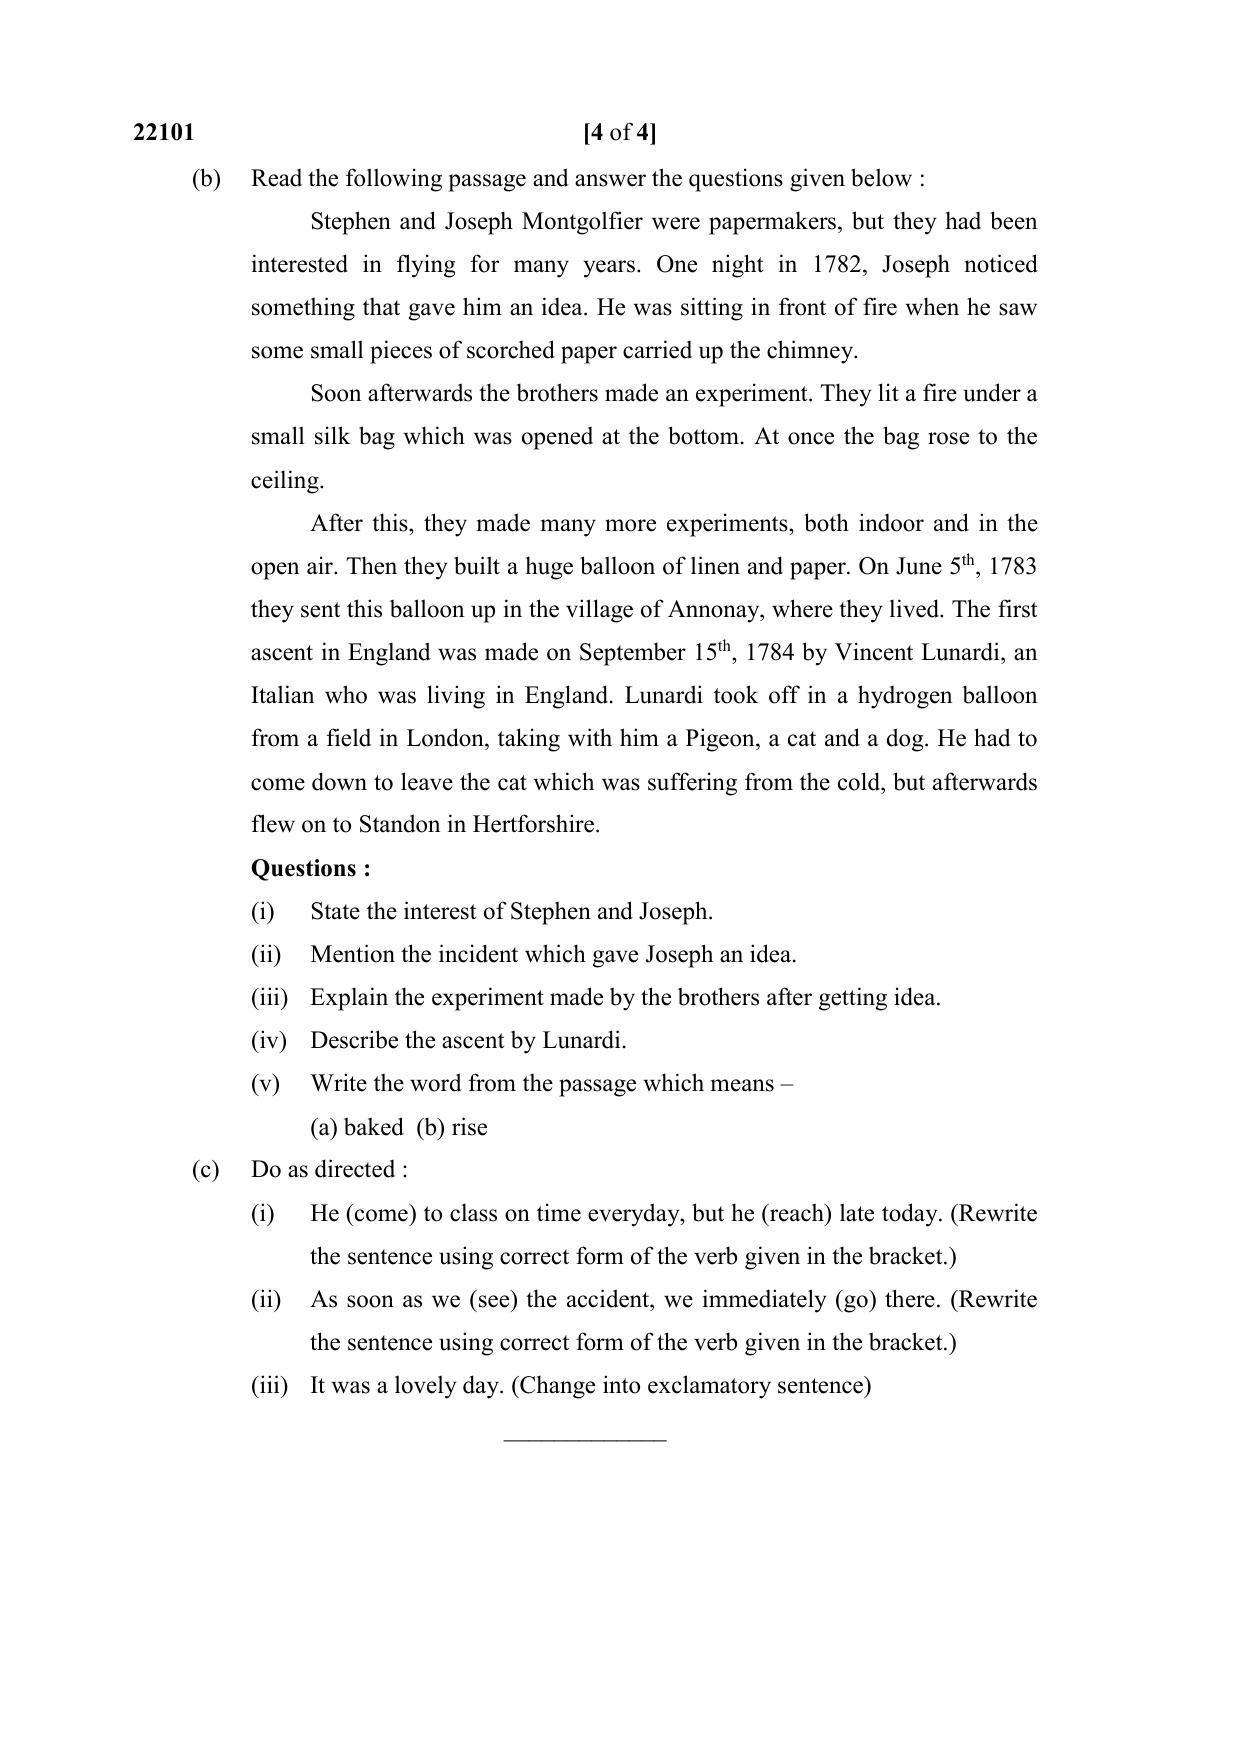 MSBTE Question Paper - 2019 - English - Page 4